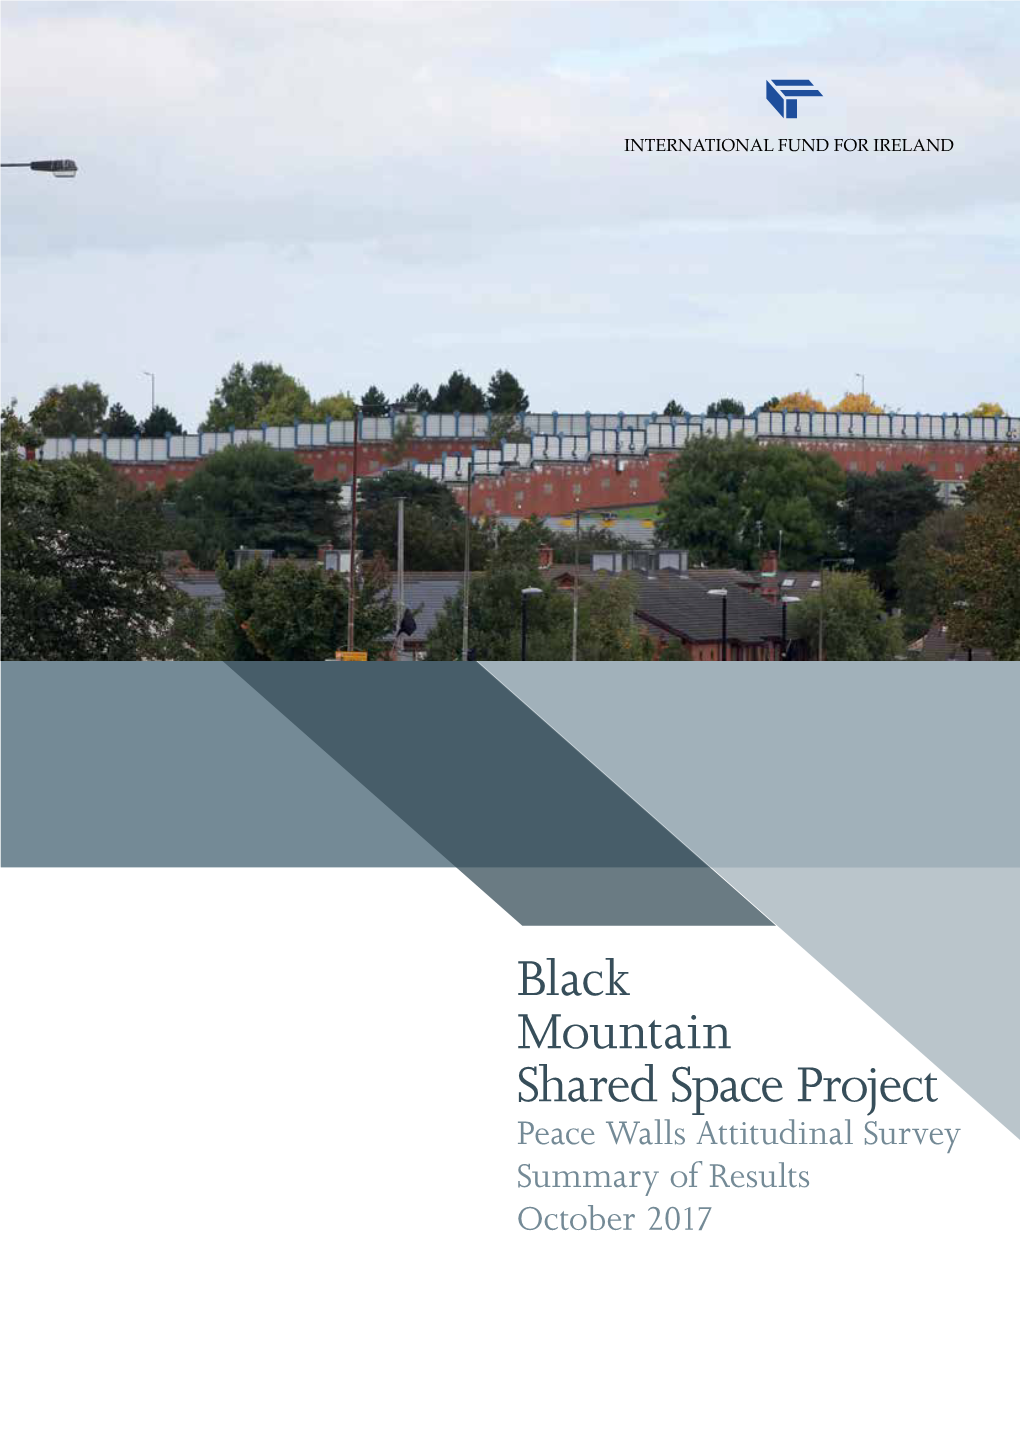 Black Mountain Shared Space Project